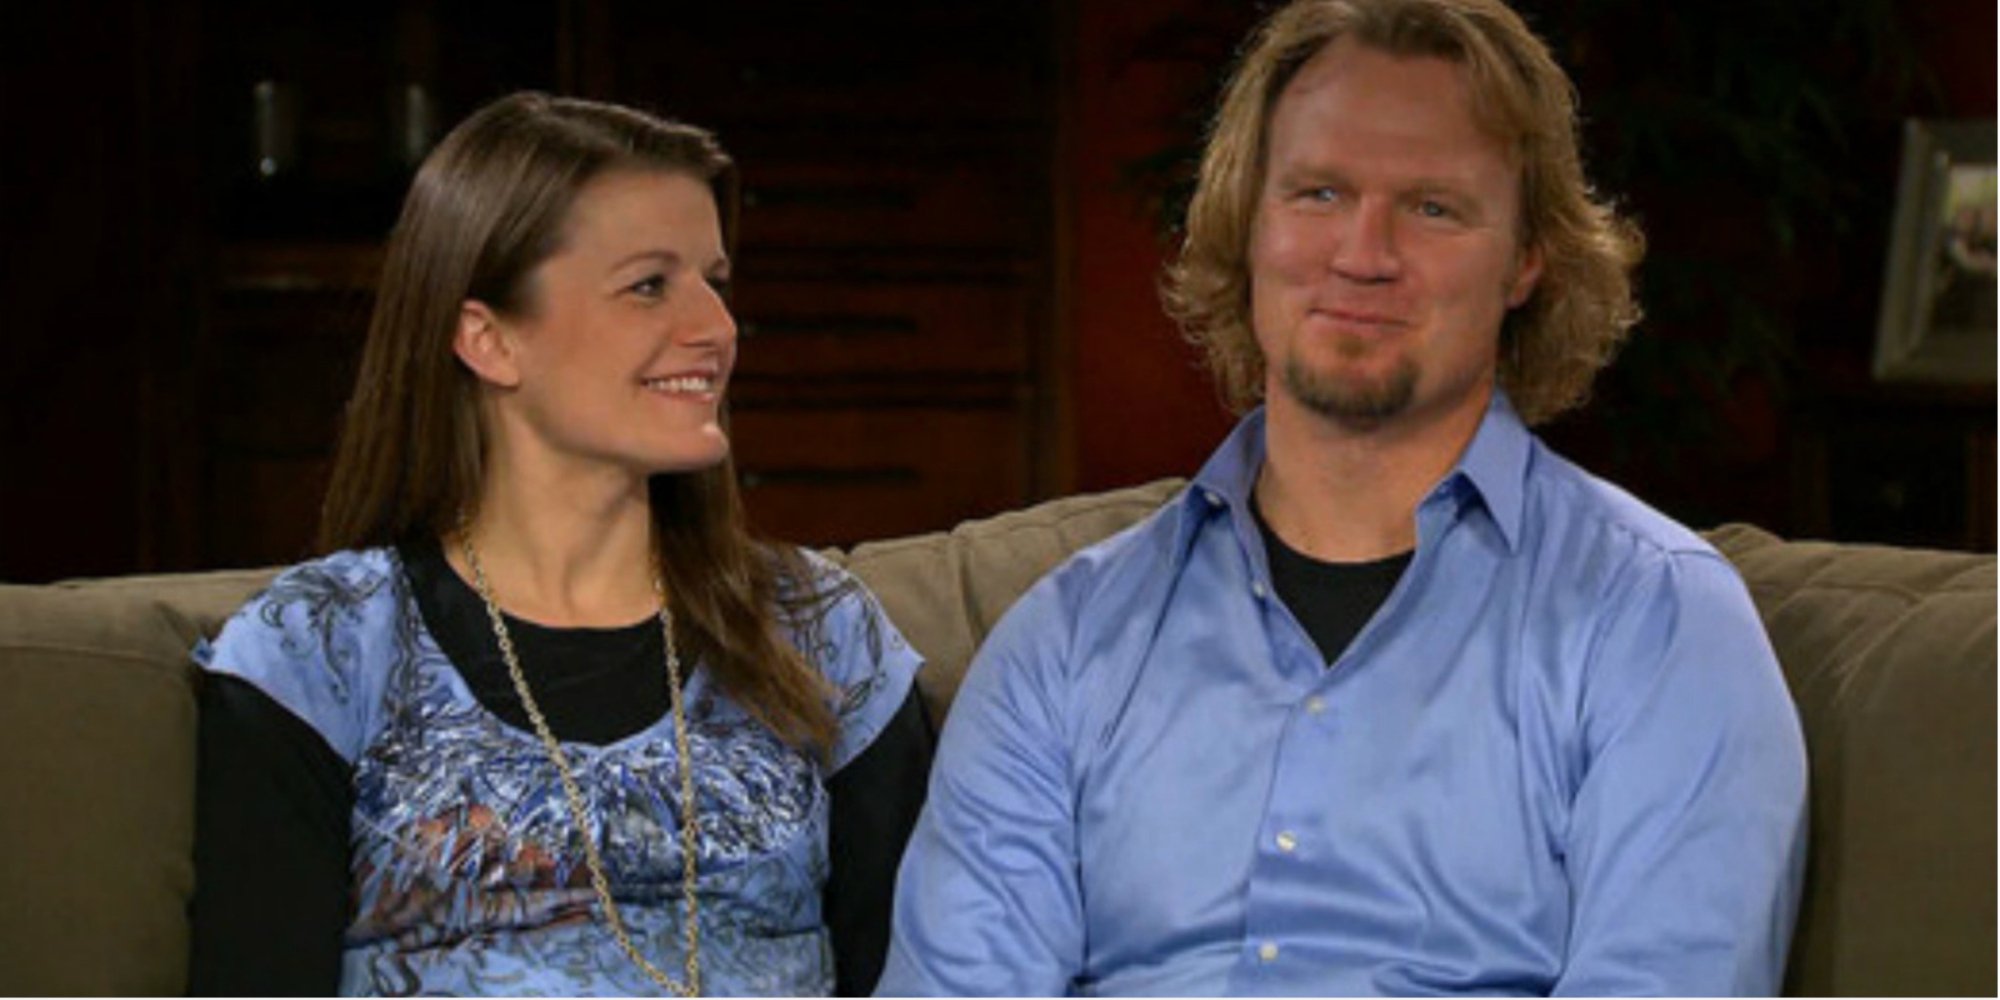 Robyn and Kody Brown during a 'Sister Wives' confessional which aired on TLC.